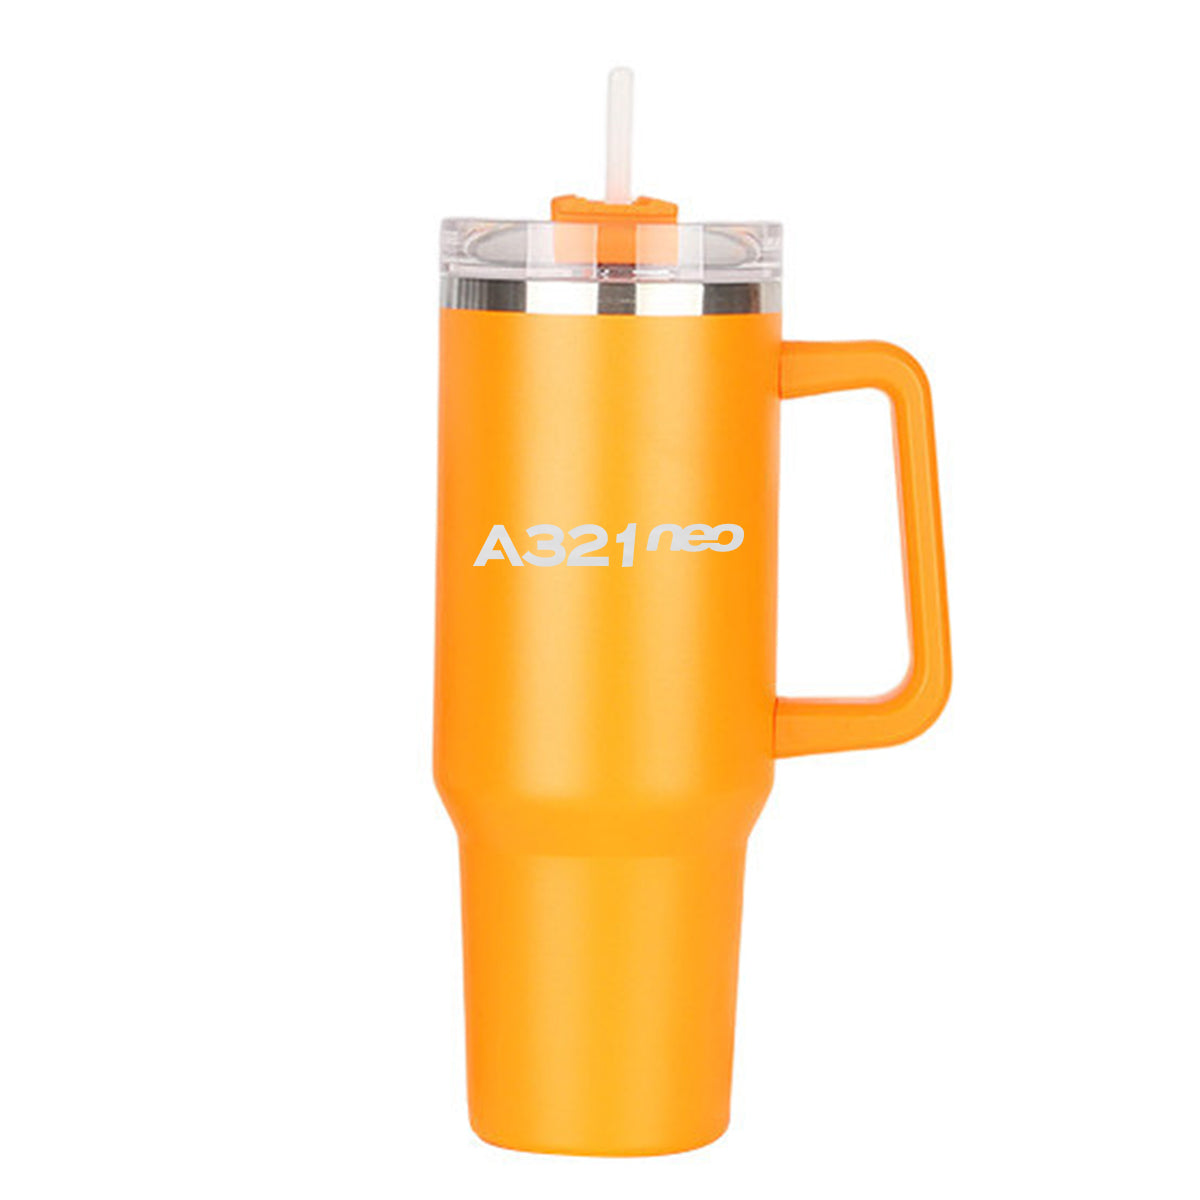 A321neo & Text Designed 40oz Stainless Steel Car Mug With Holder